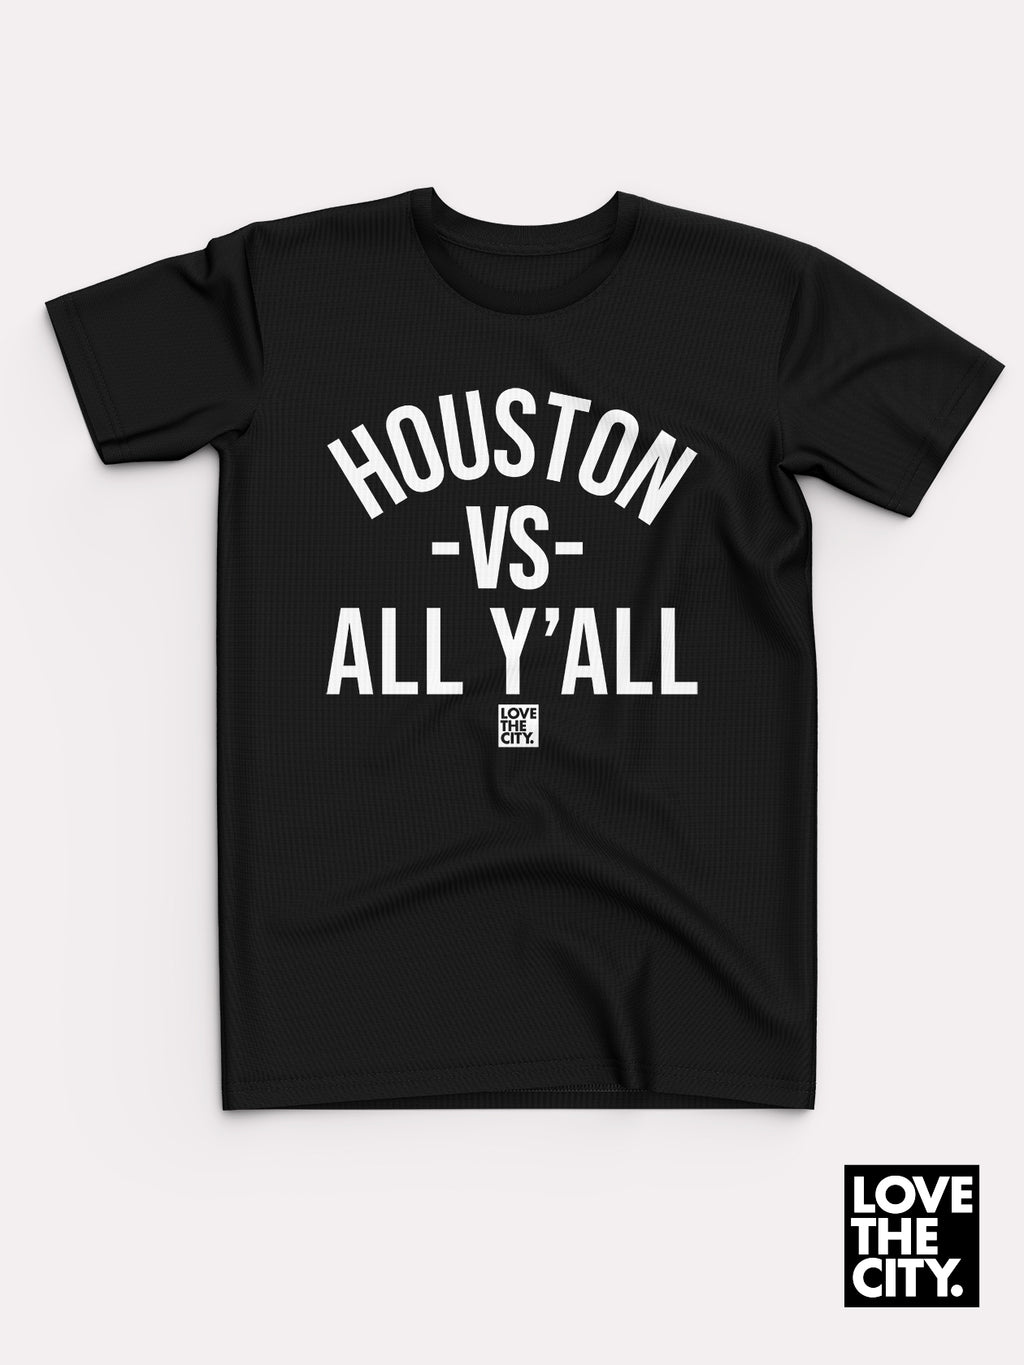 Houston Vs All Y'all "Culture" Tee